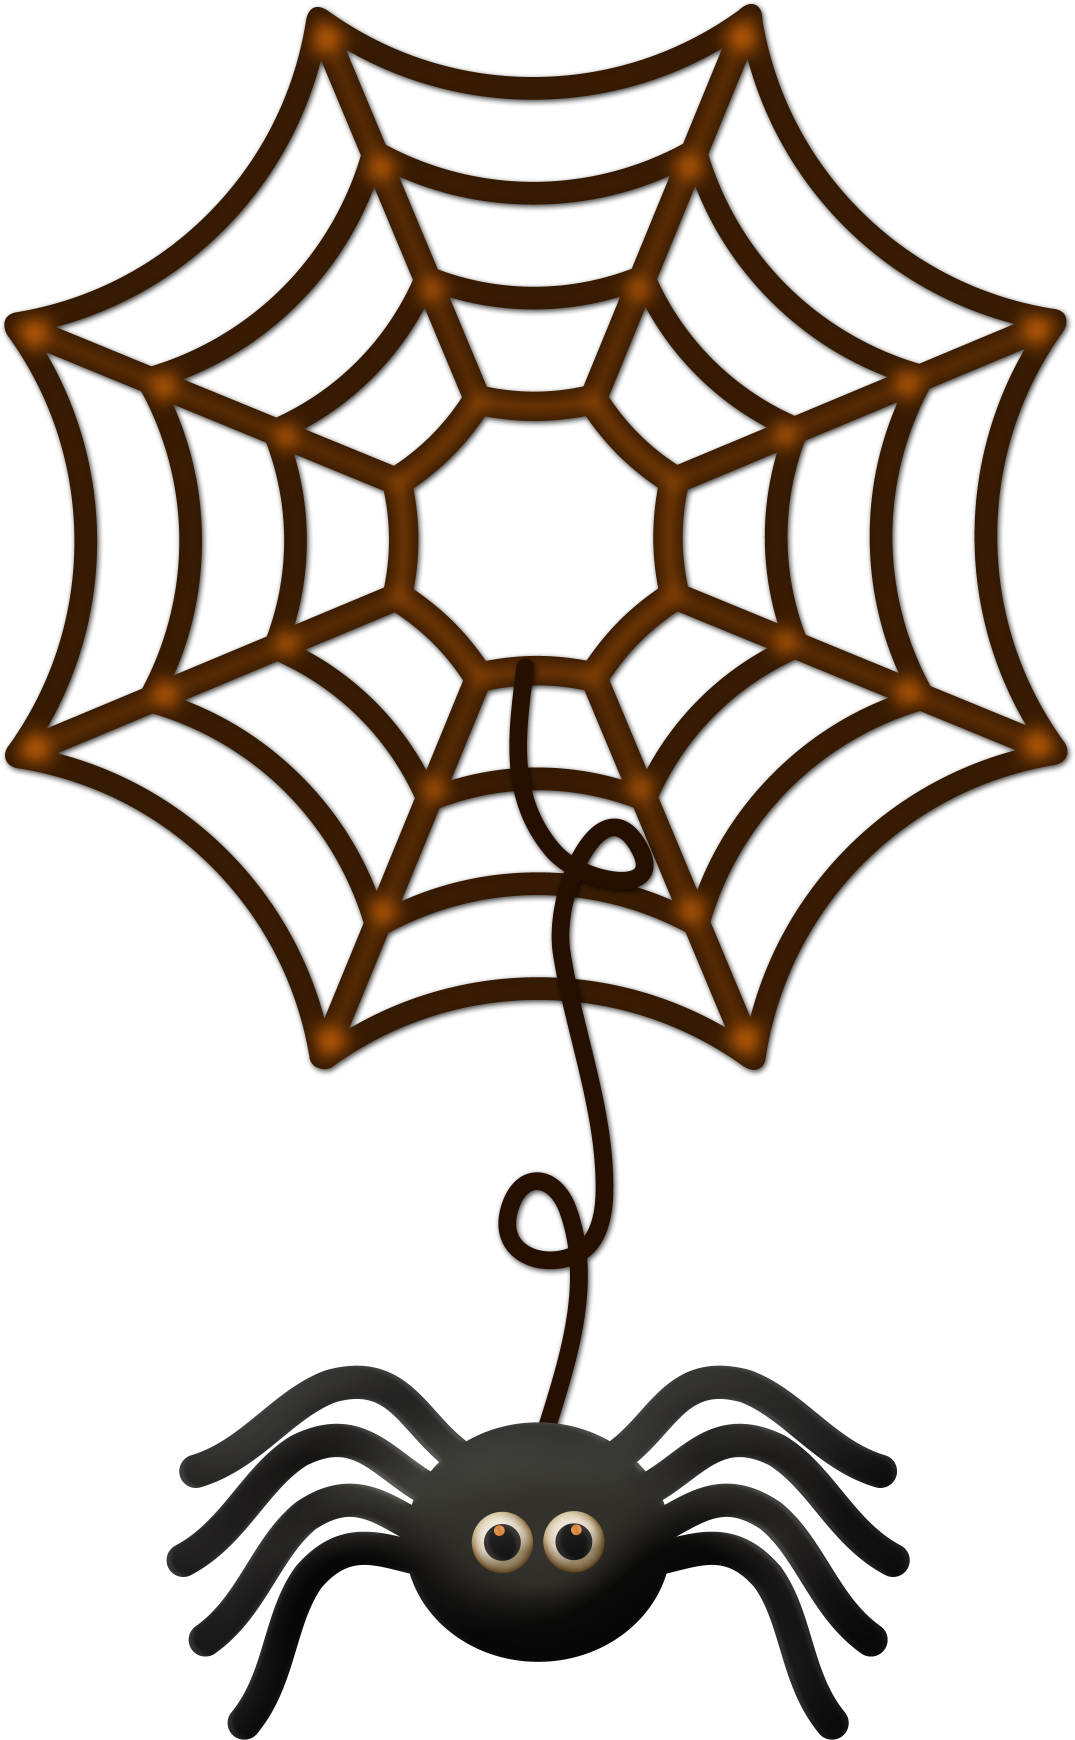 Indoors On Dirt/sand Mix 80' By 120' Ring - Cobweb Icon (1075x1740)